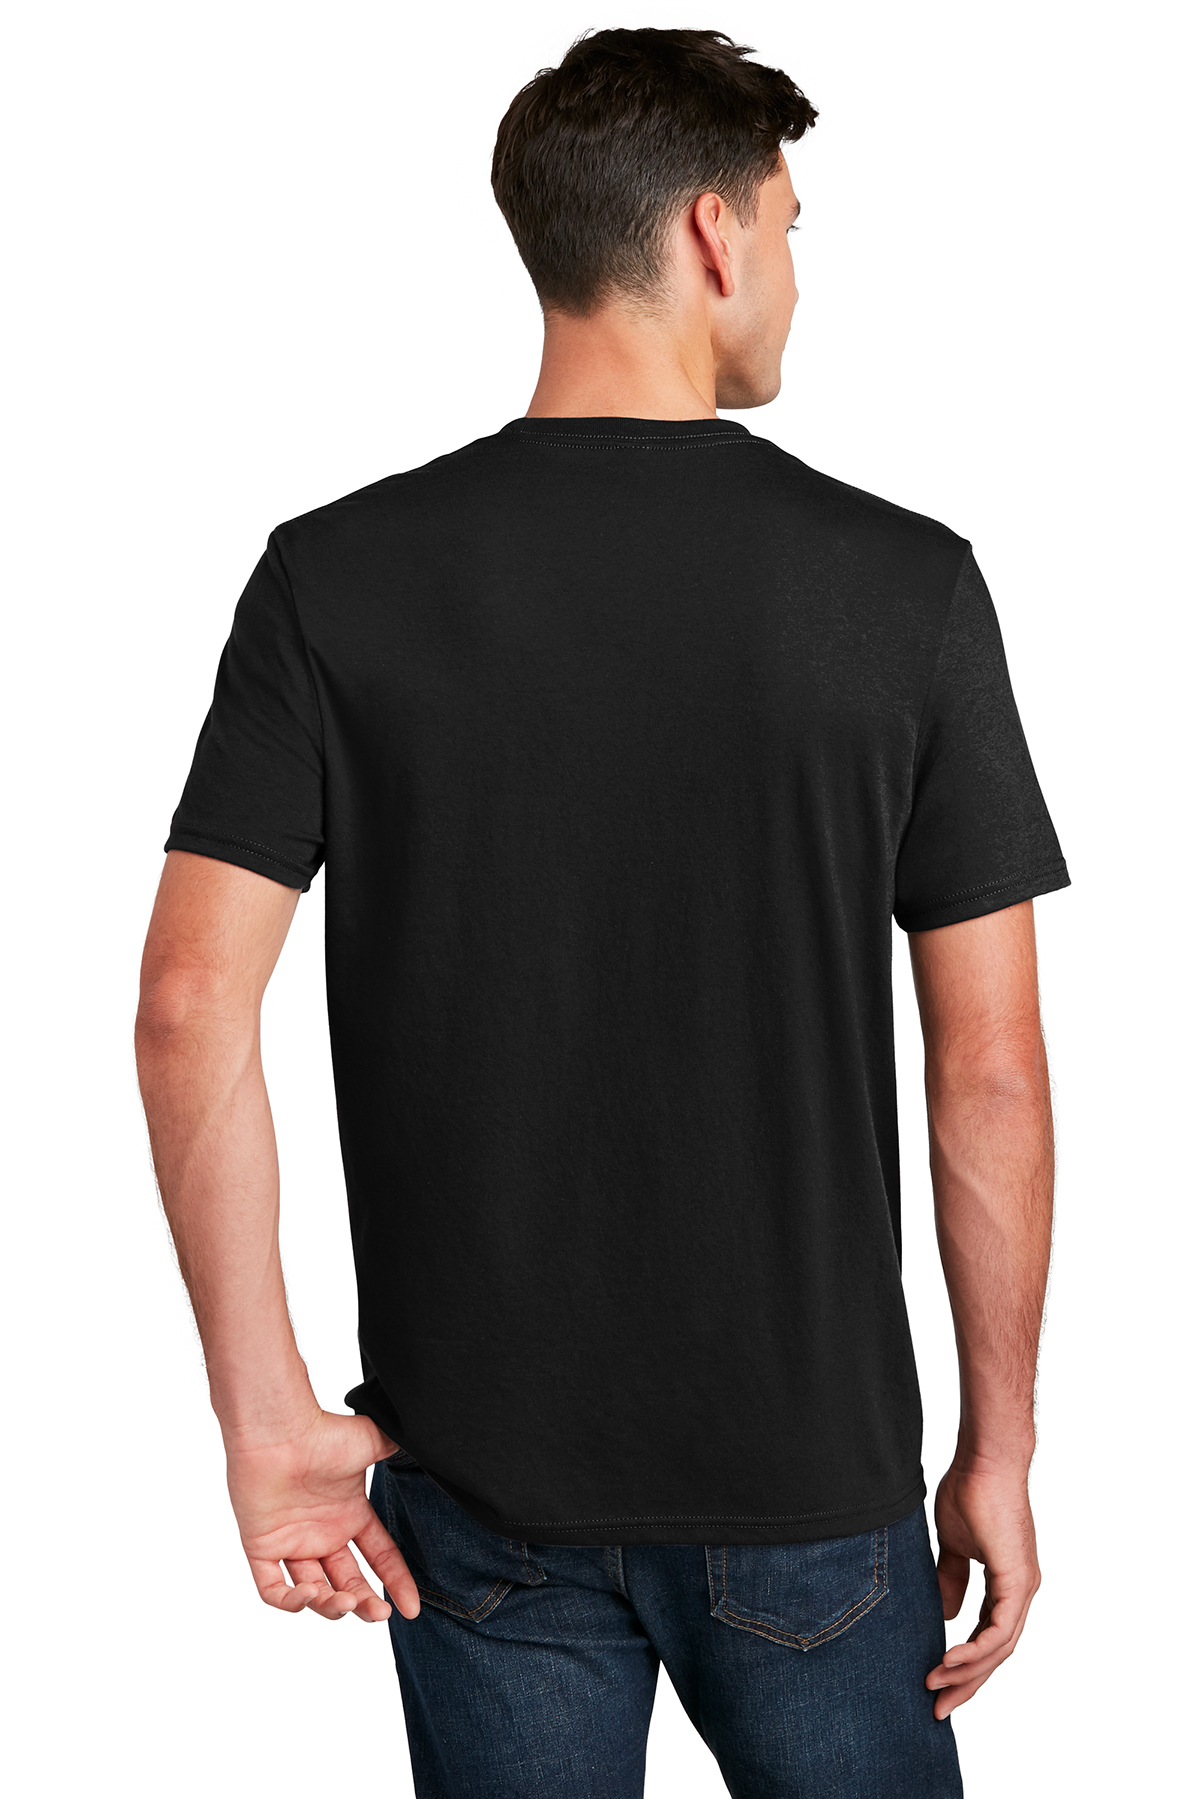 District Perfect Blend Tee | Product | District